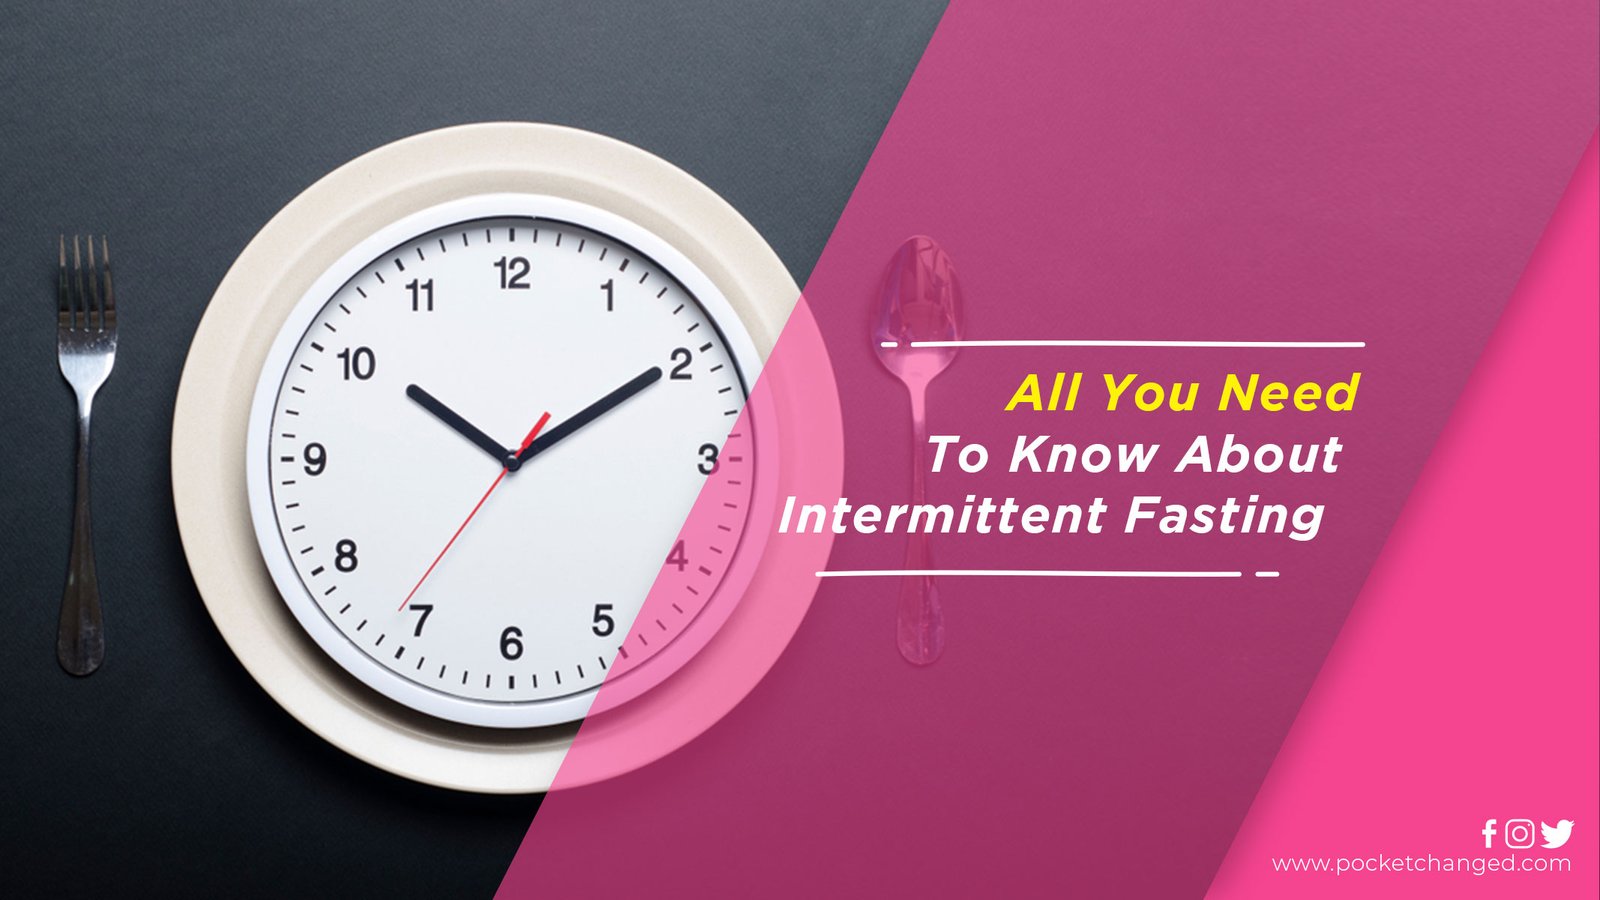 All-You-Need-To-Know-About-Intermittent-Fasting